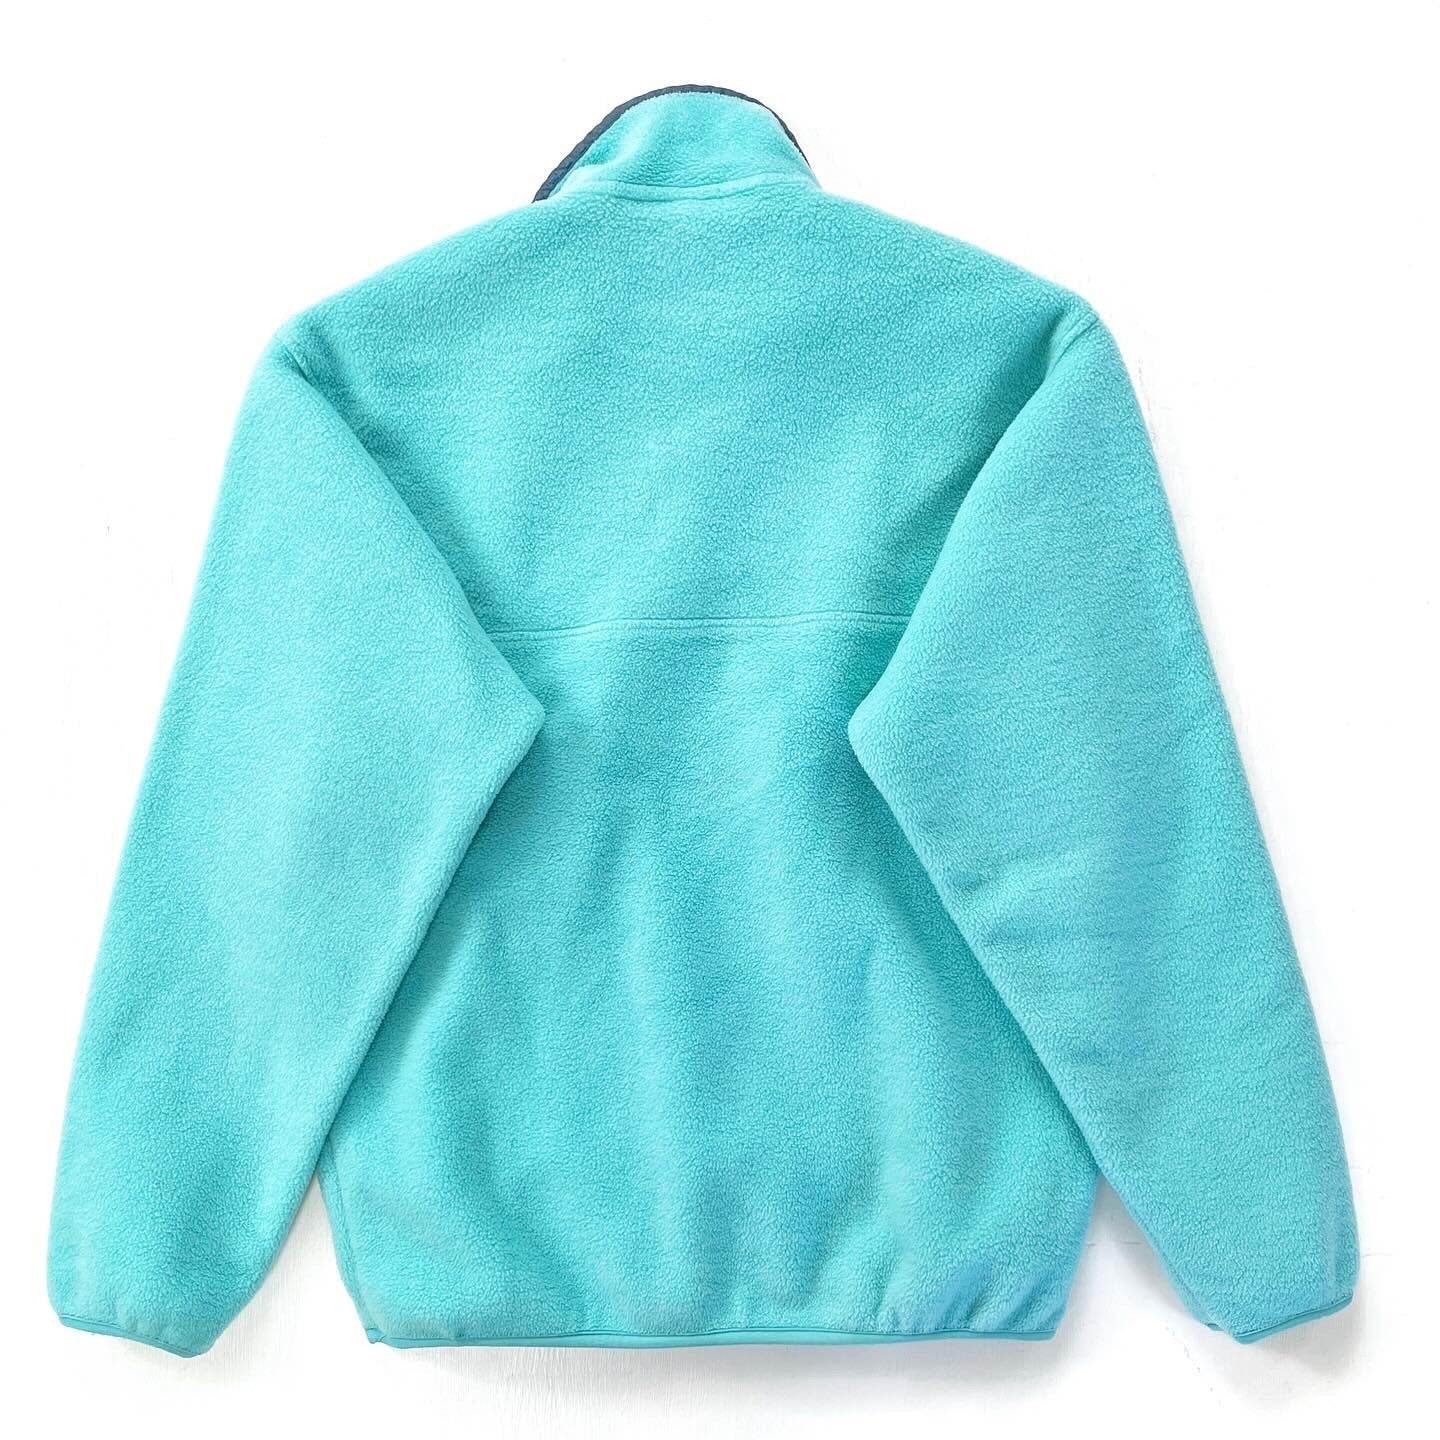 1997 Patagonia Made In The U.S.A. Synchilla Snap-T, Aqua (S)